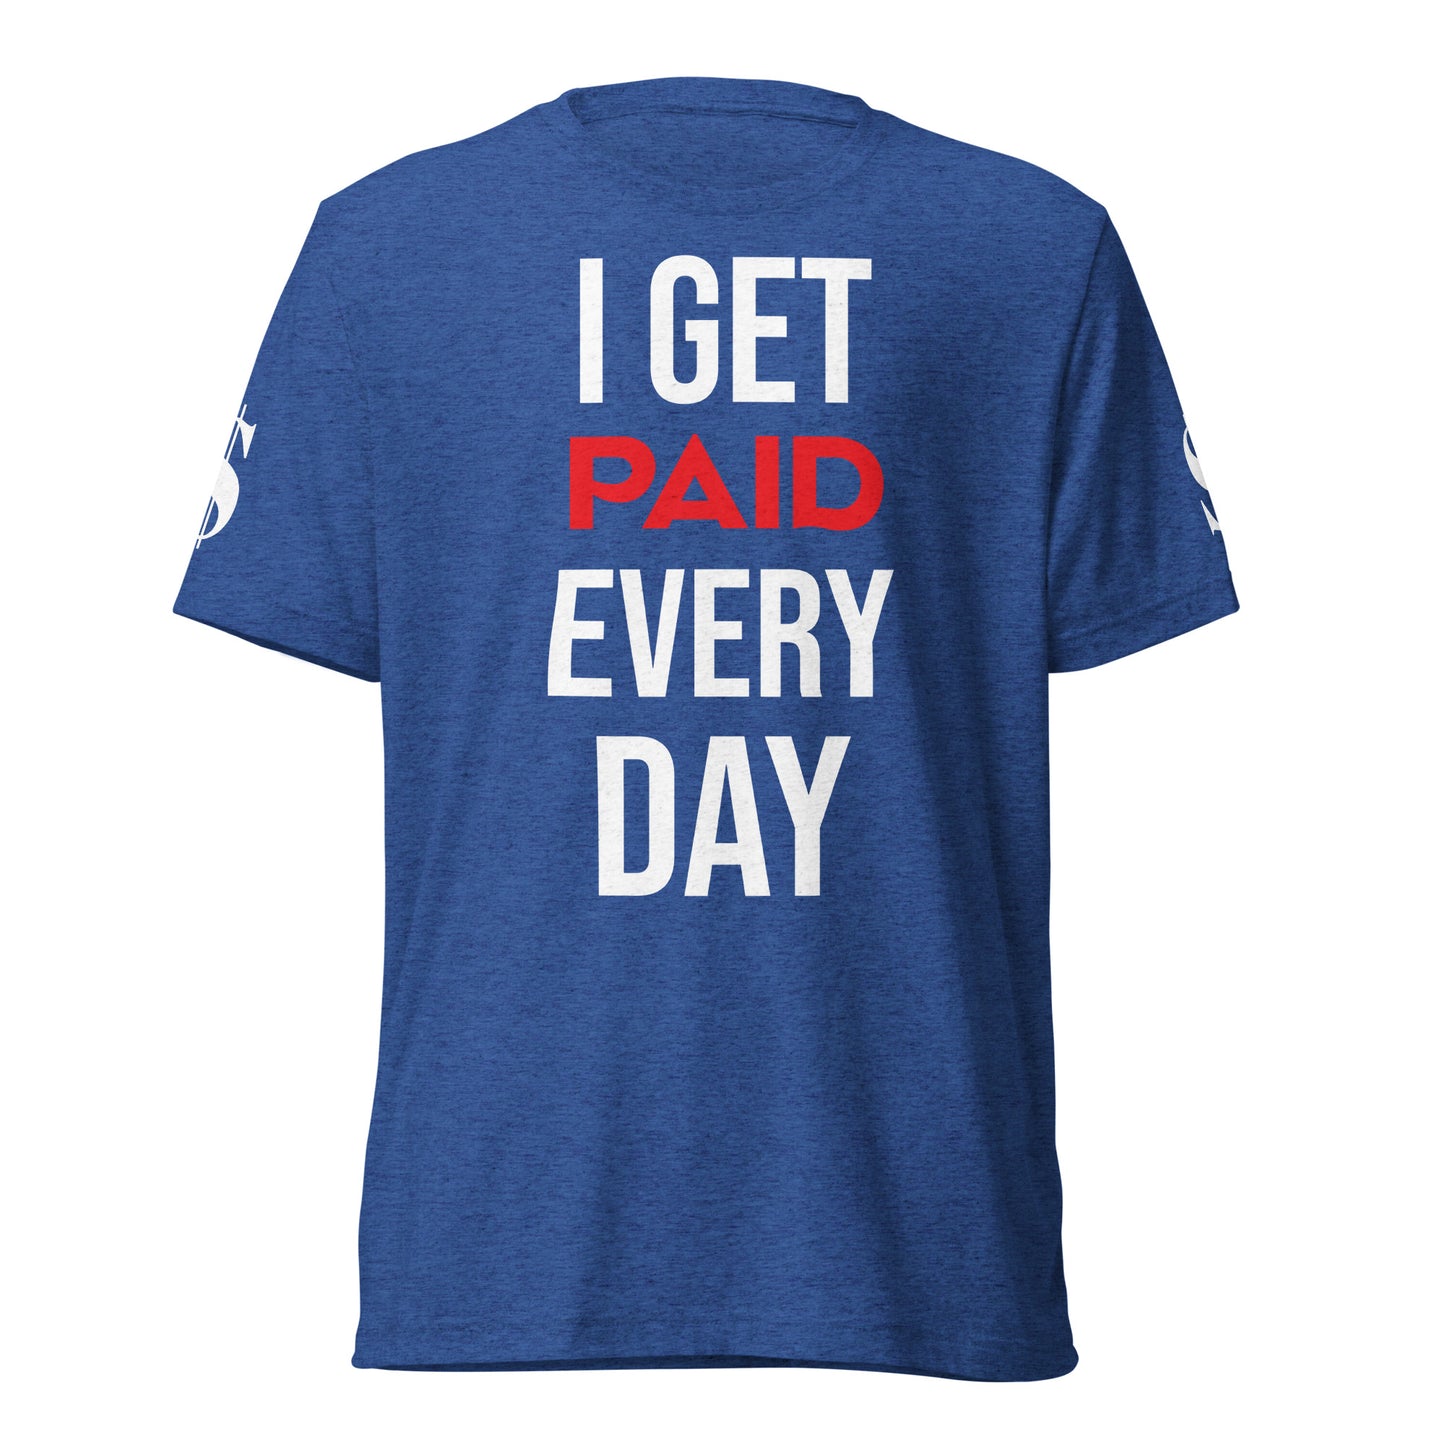 I Get Paid Every Day T-Shirt